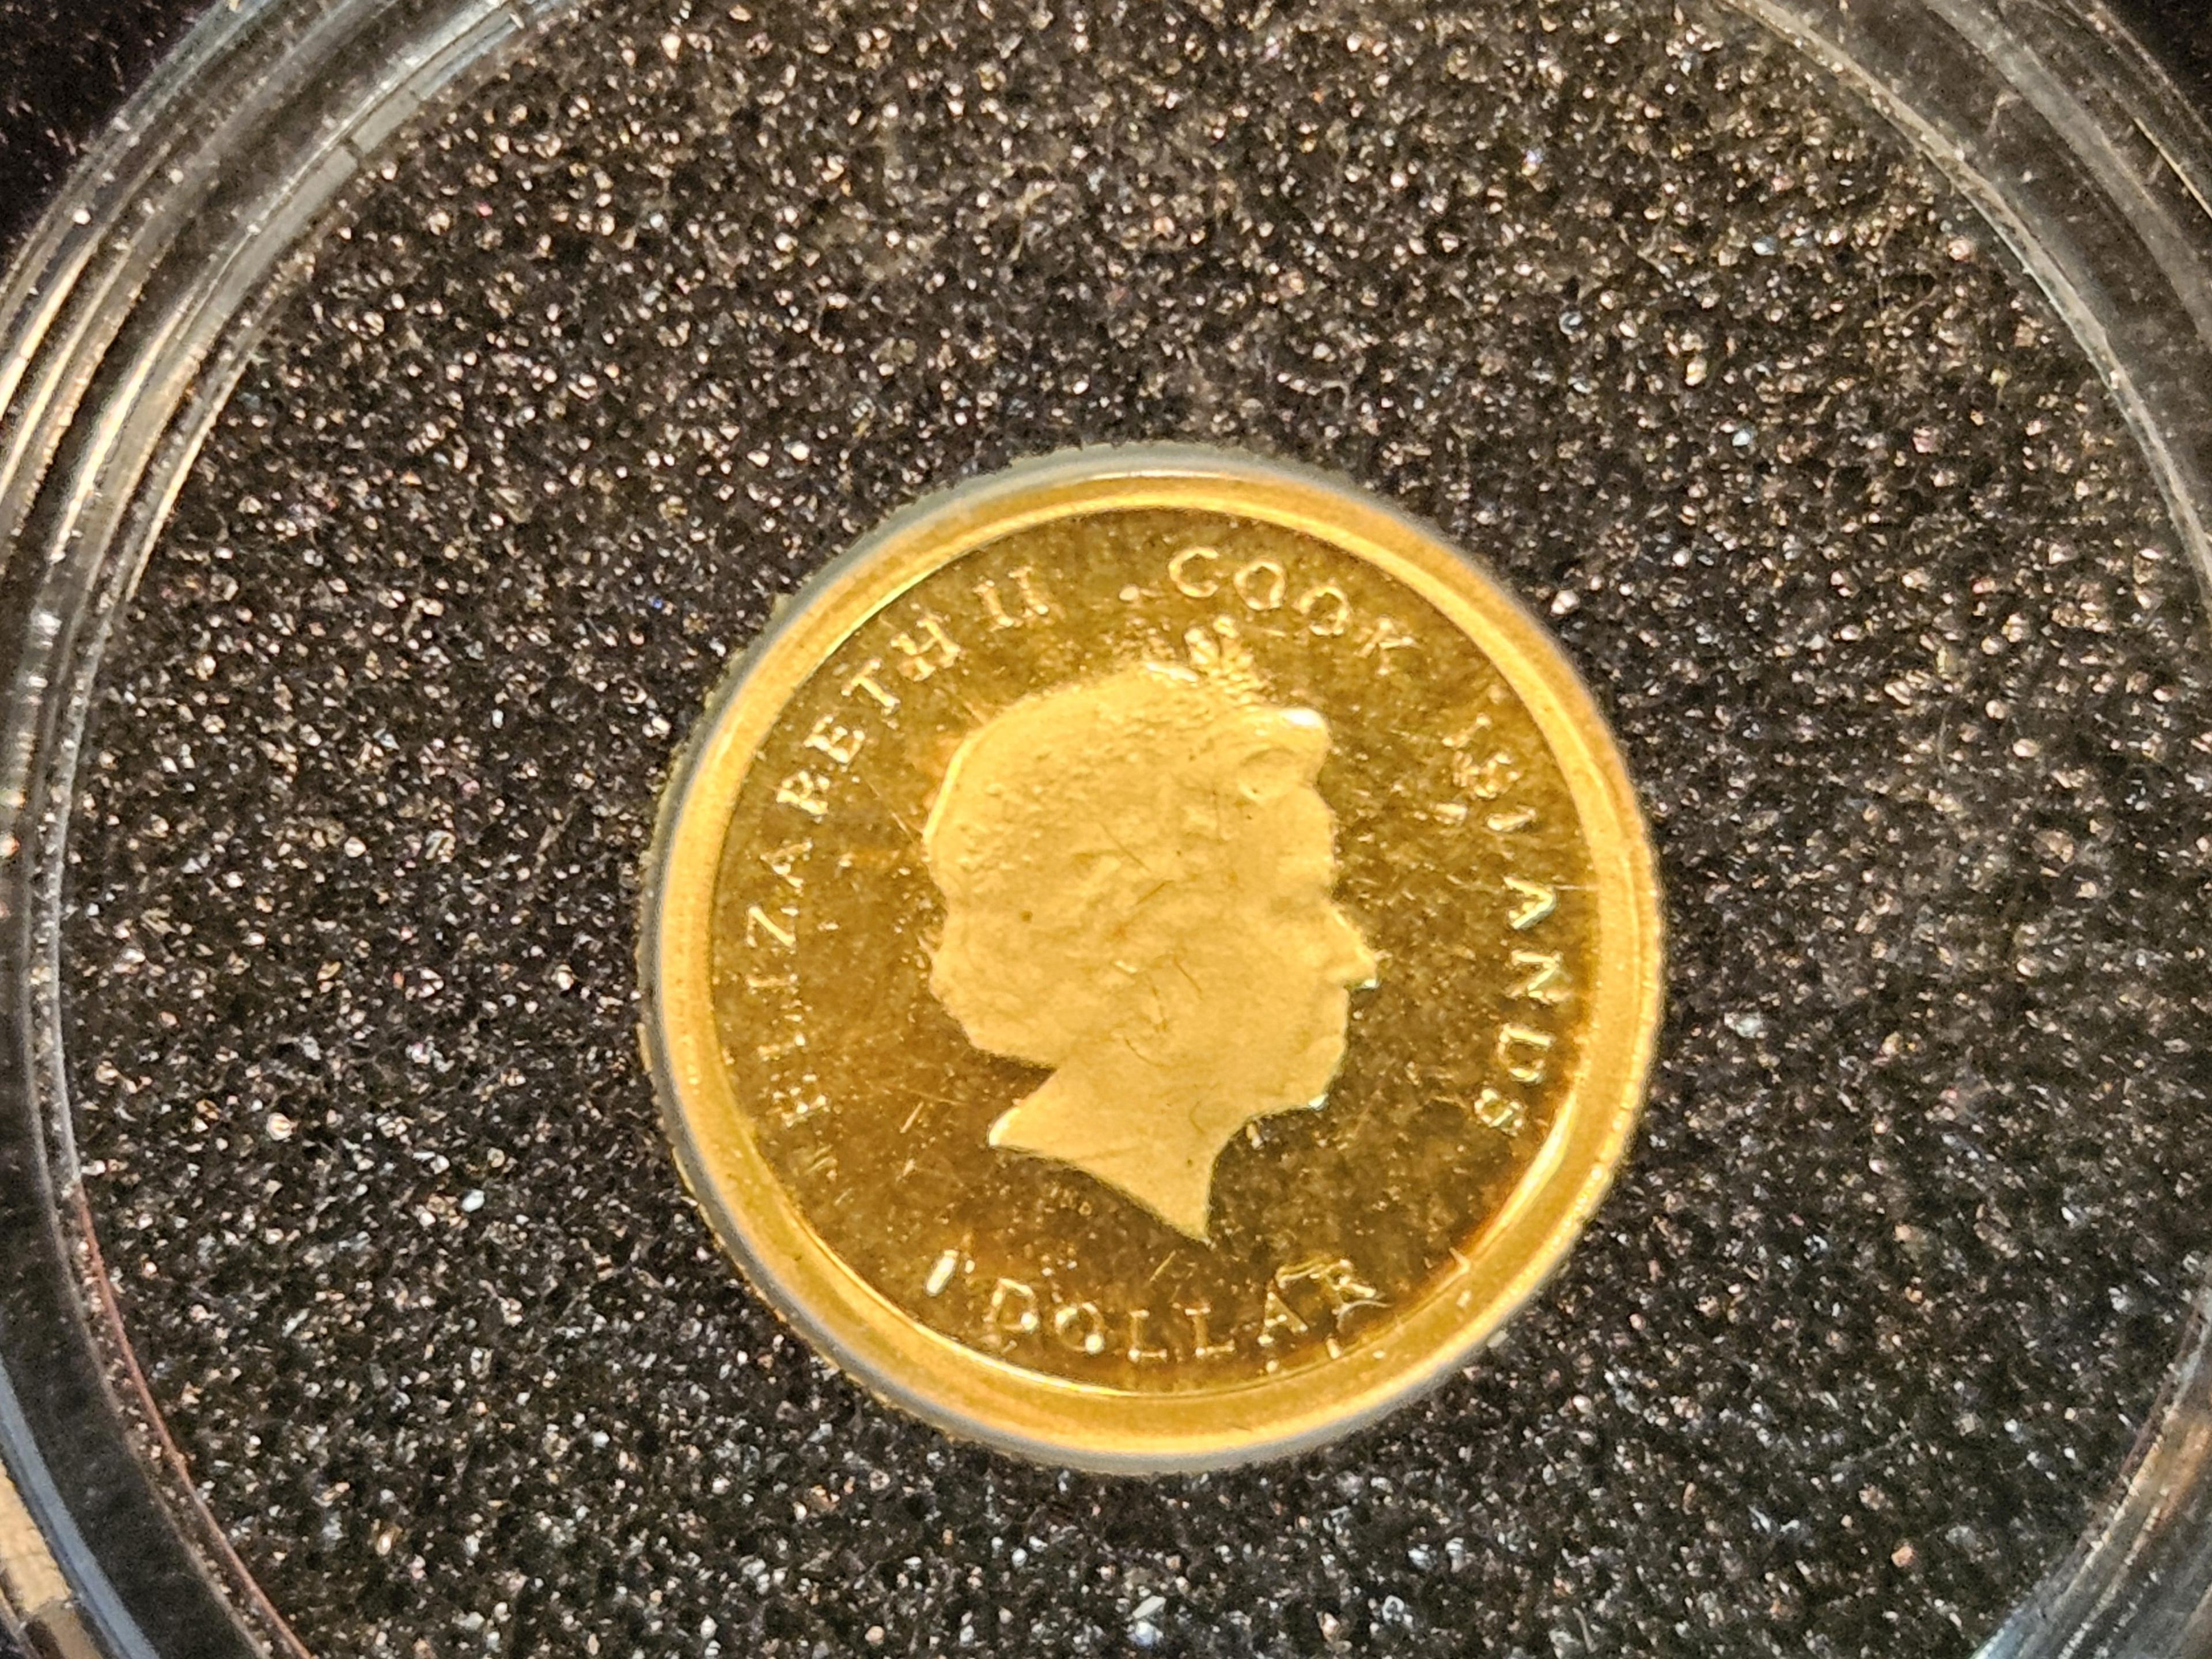 GOLD! 2012 Cook Islands Proof Gold Dollar